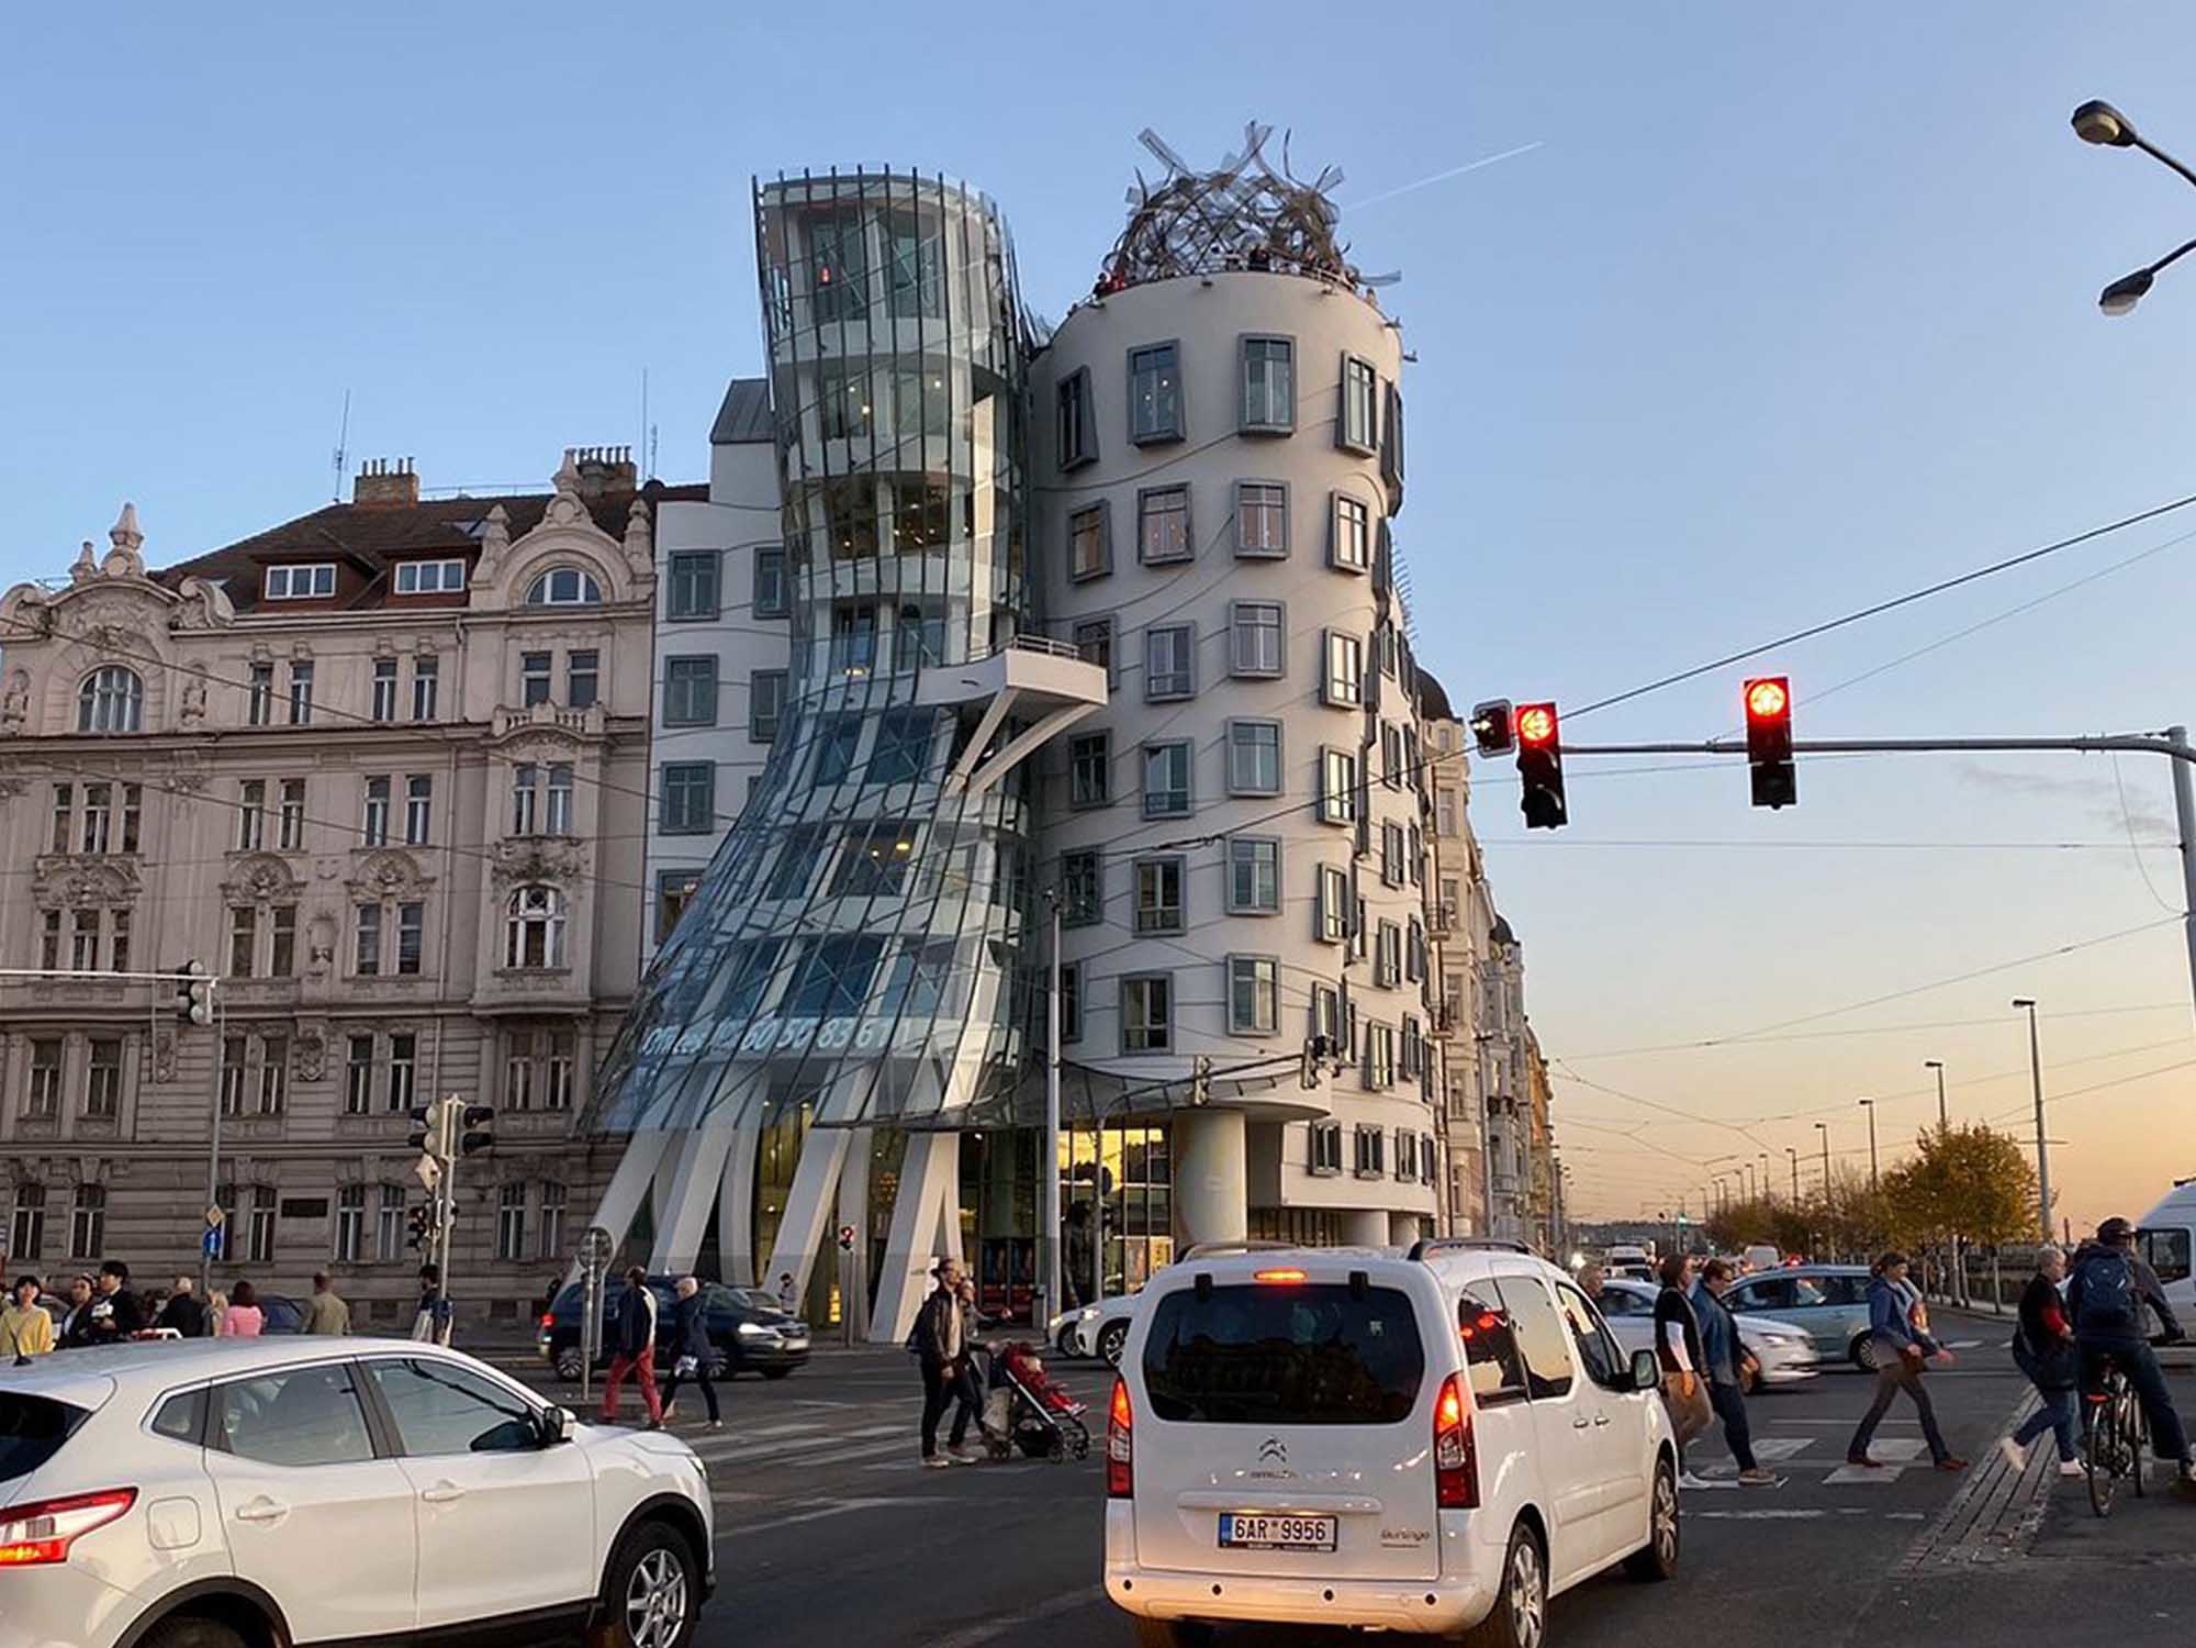 Amazing Hotels in Prague - Dancing House Hotel